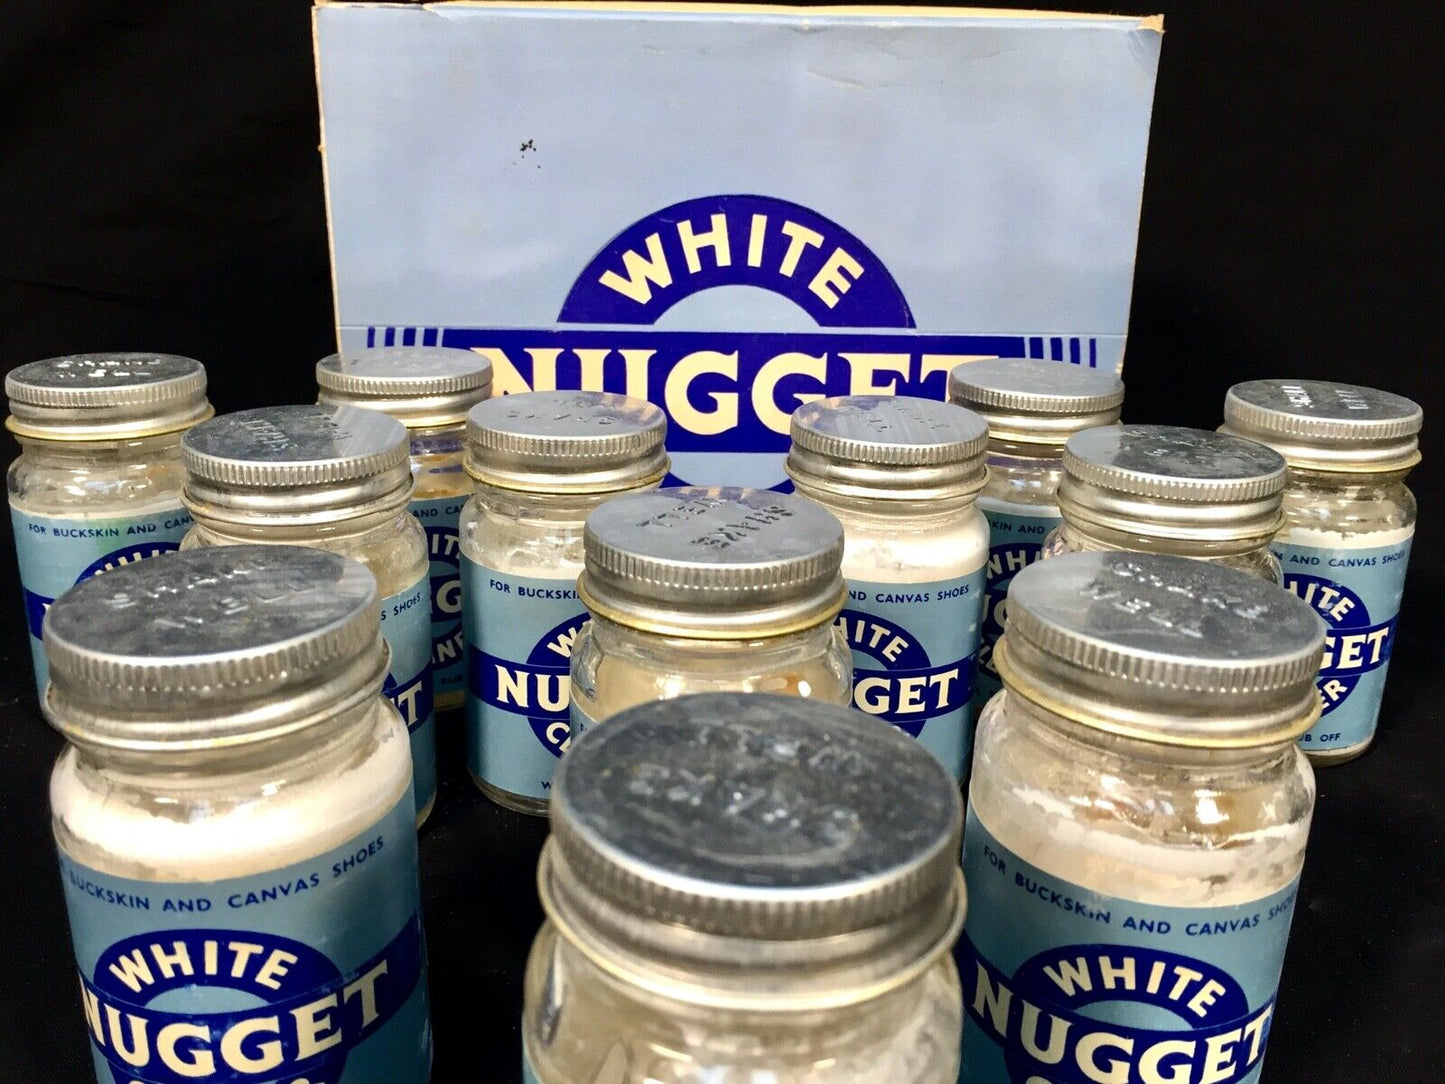 Antique Advertising - Boxed Case of Nugget Shoe Polish White in Glass Jars